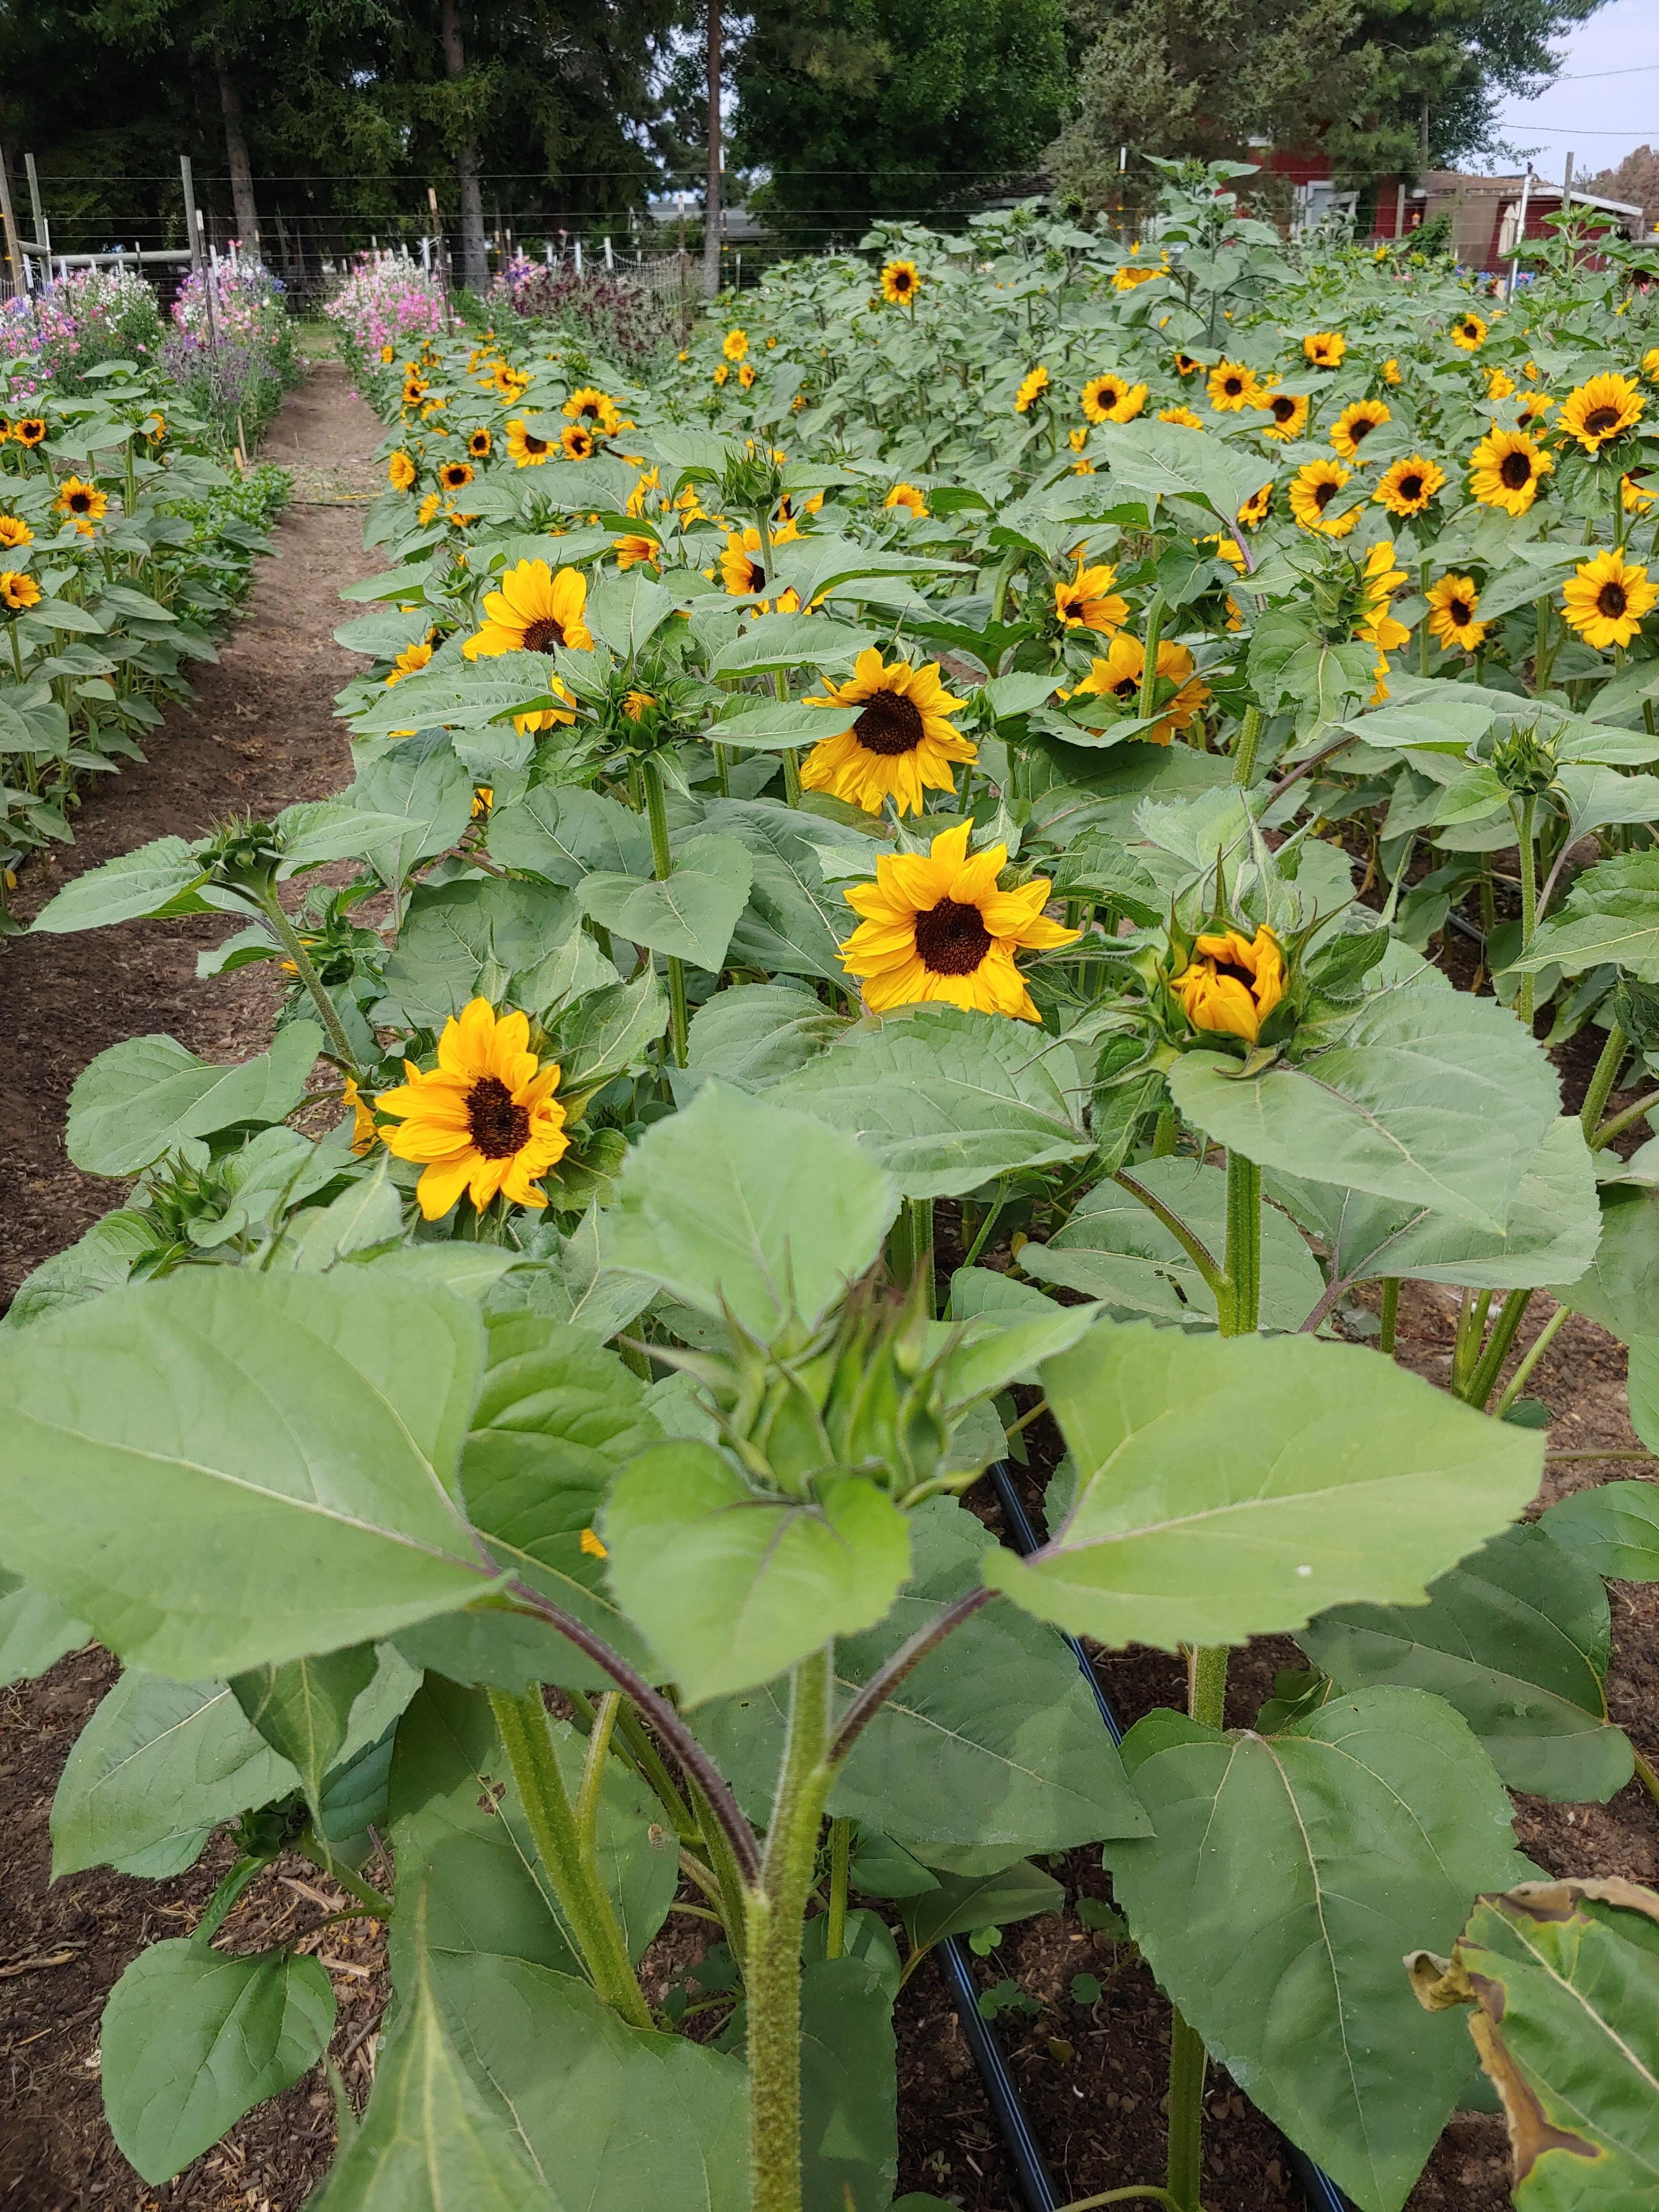 Next Happening: Order Sunflowers from our Neighbor Farm this Week!